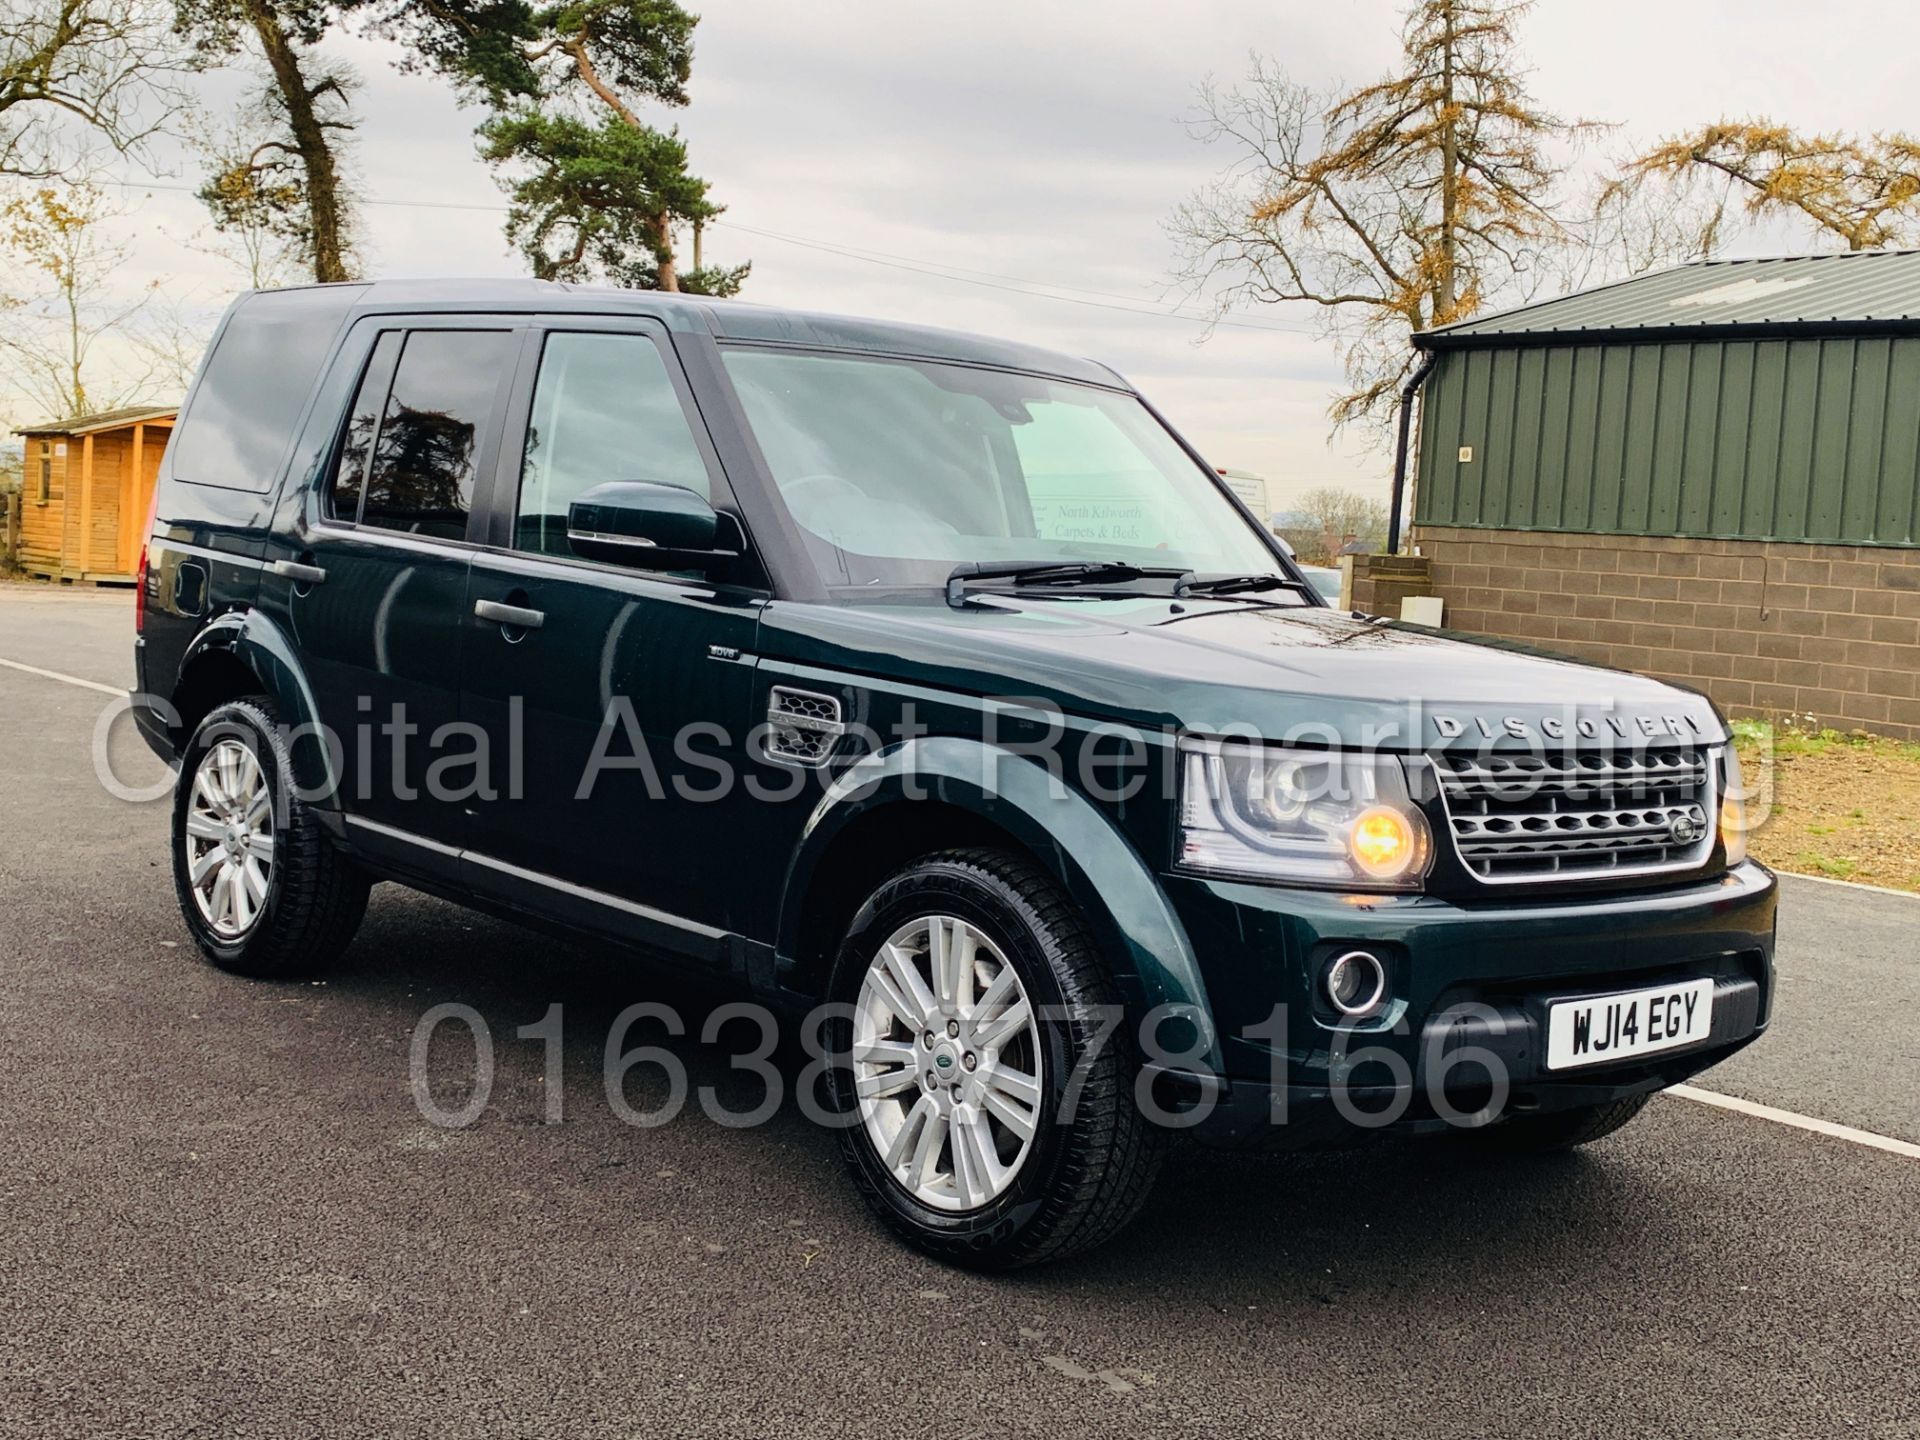 LAND ROVER DISCOVERY 4 *XS EDITION* UTILITY COMMERCIAL (2014) '3.0 SDV6 - 8 SPEED AUTO' *TOP SPEC* - Image 11 of 49